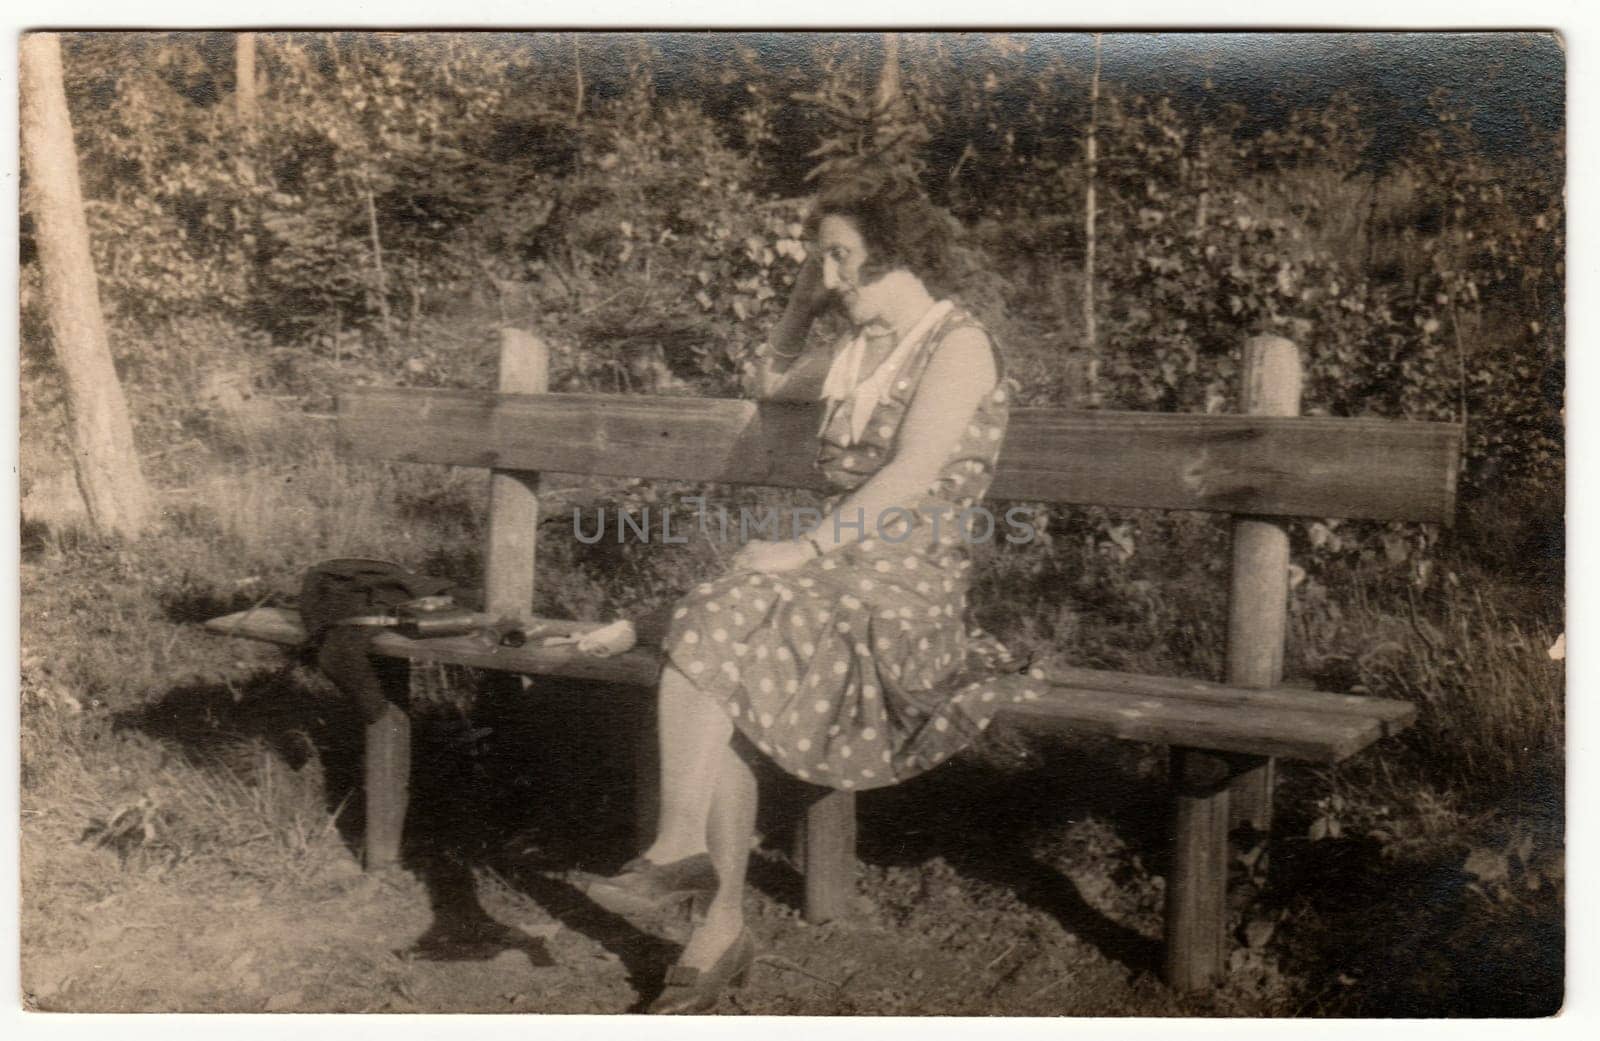 Vintage photo shows woman sits on the wooden bench in the park. Retro black and white photography. Circa 1930s. by roman_nerud